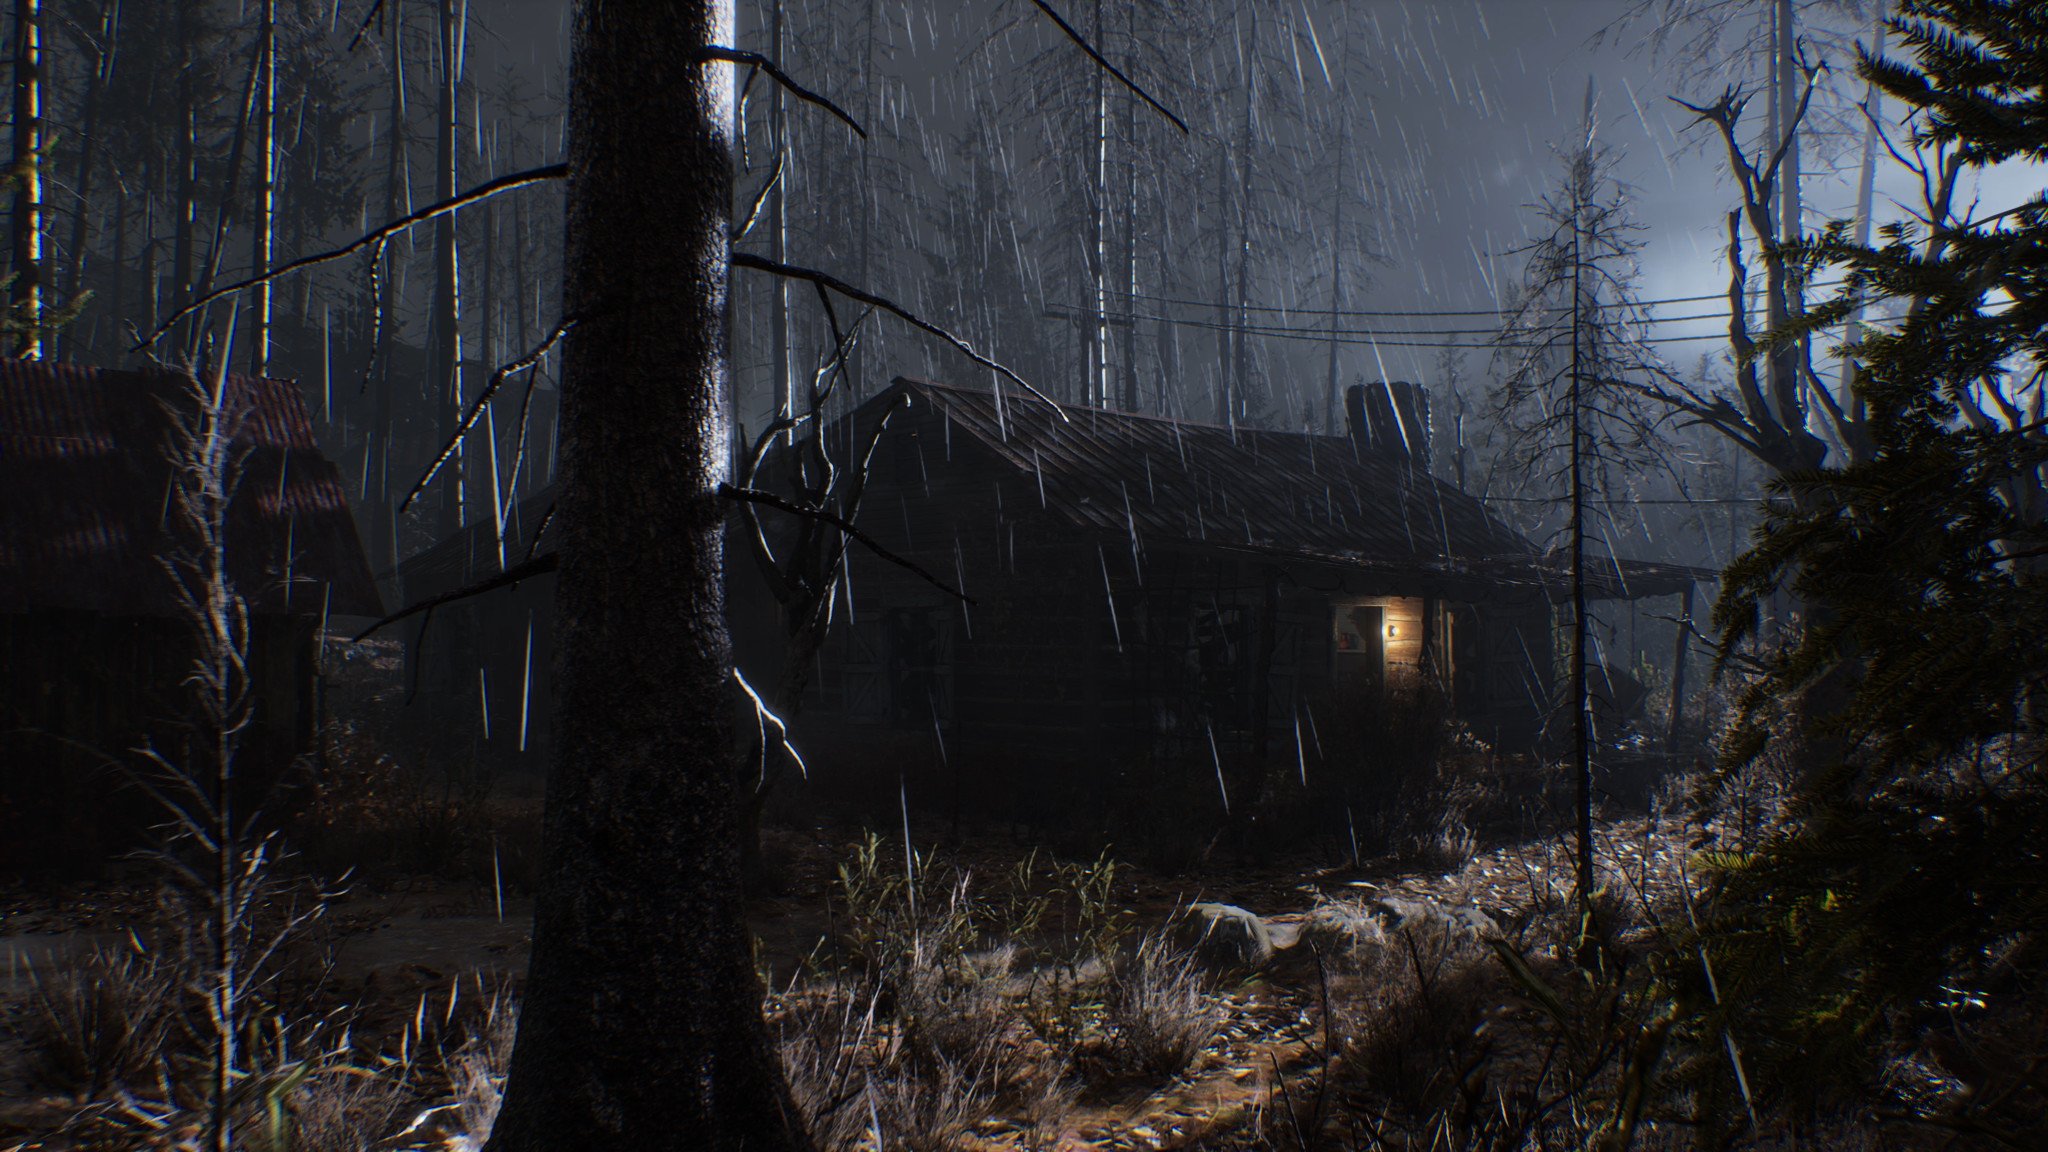 Evil Dead: The Game review – Groovy asymmetrical horror is a love